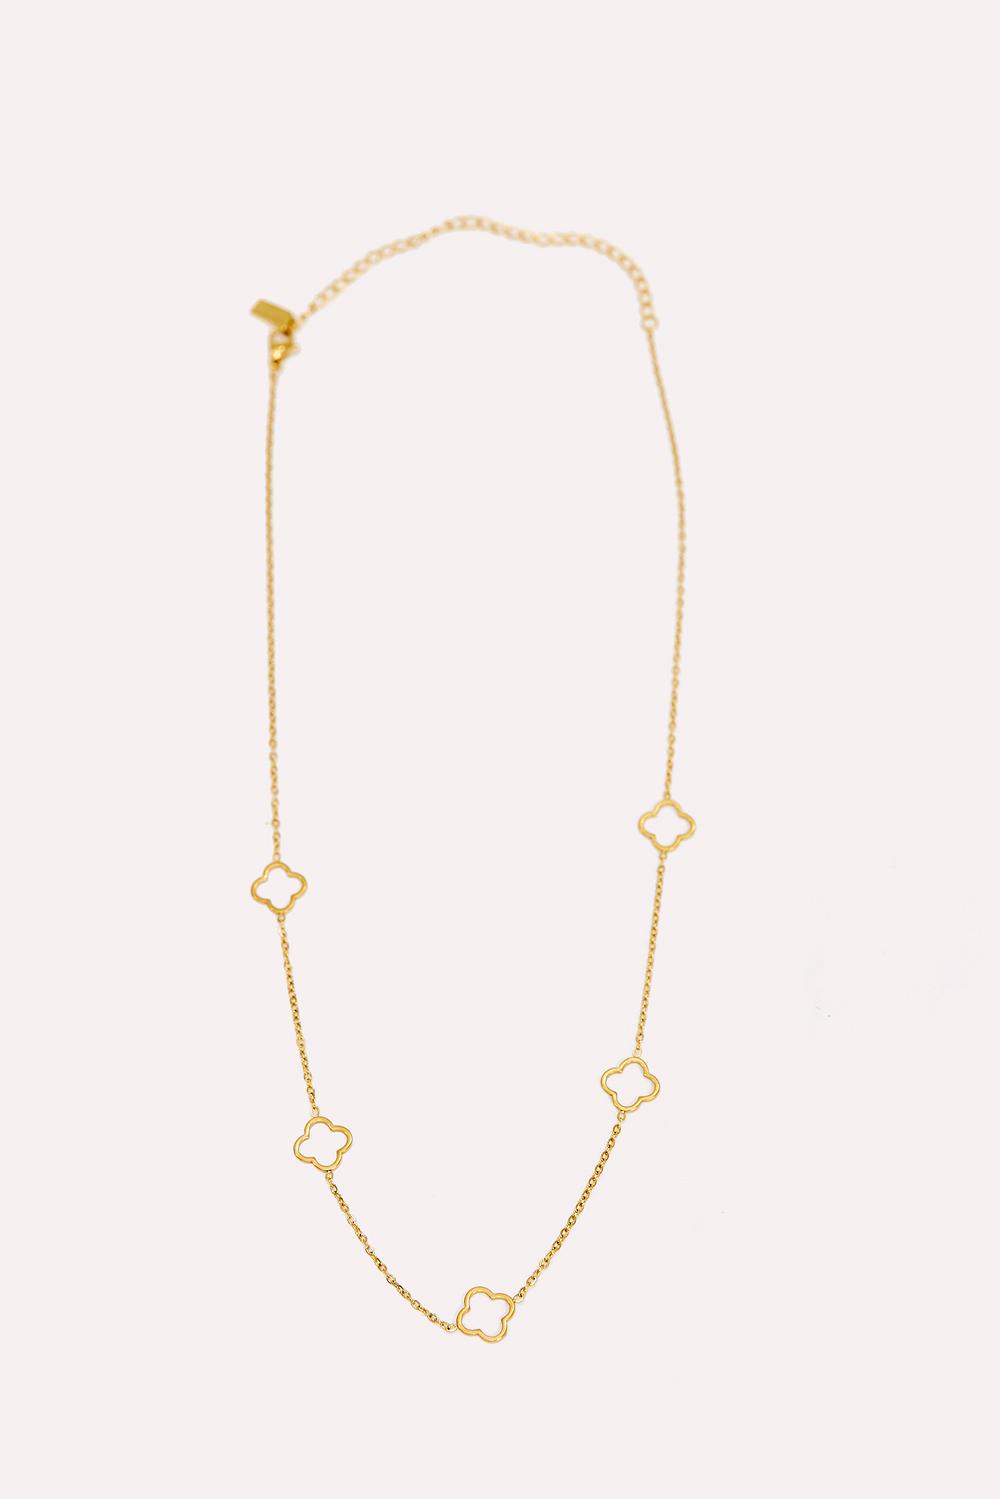 Golden necklace with clover pendants